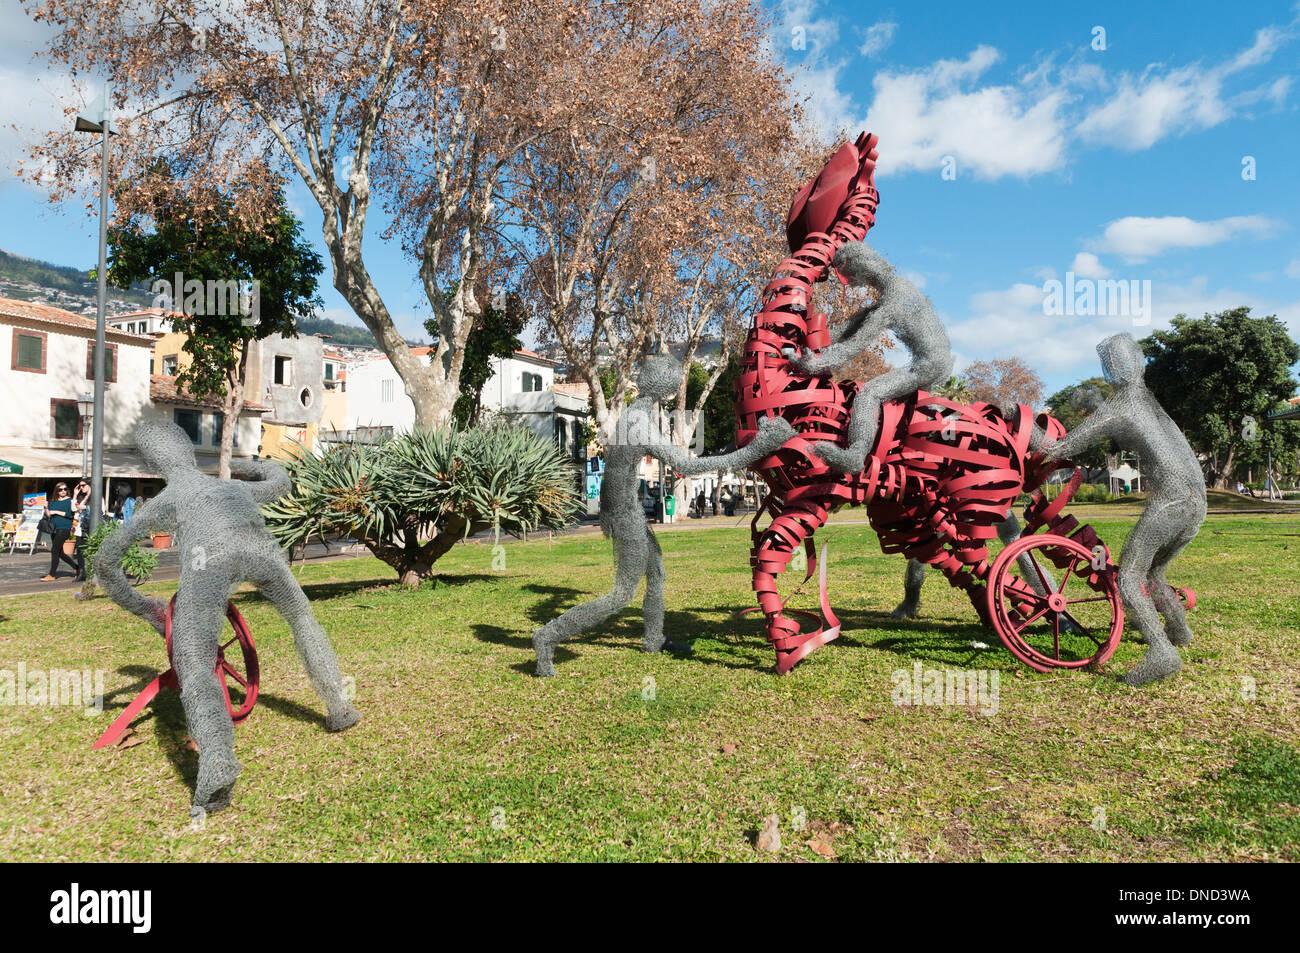 Portugal, Madeira, Funchal, Parque Almirante Reis: Public art, wire mesh and metal sculptures Stock Photo